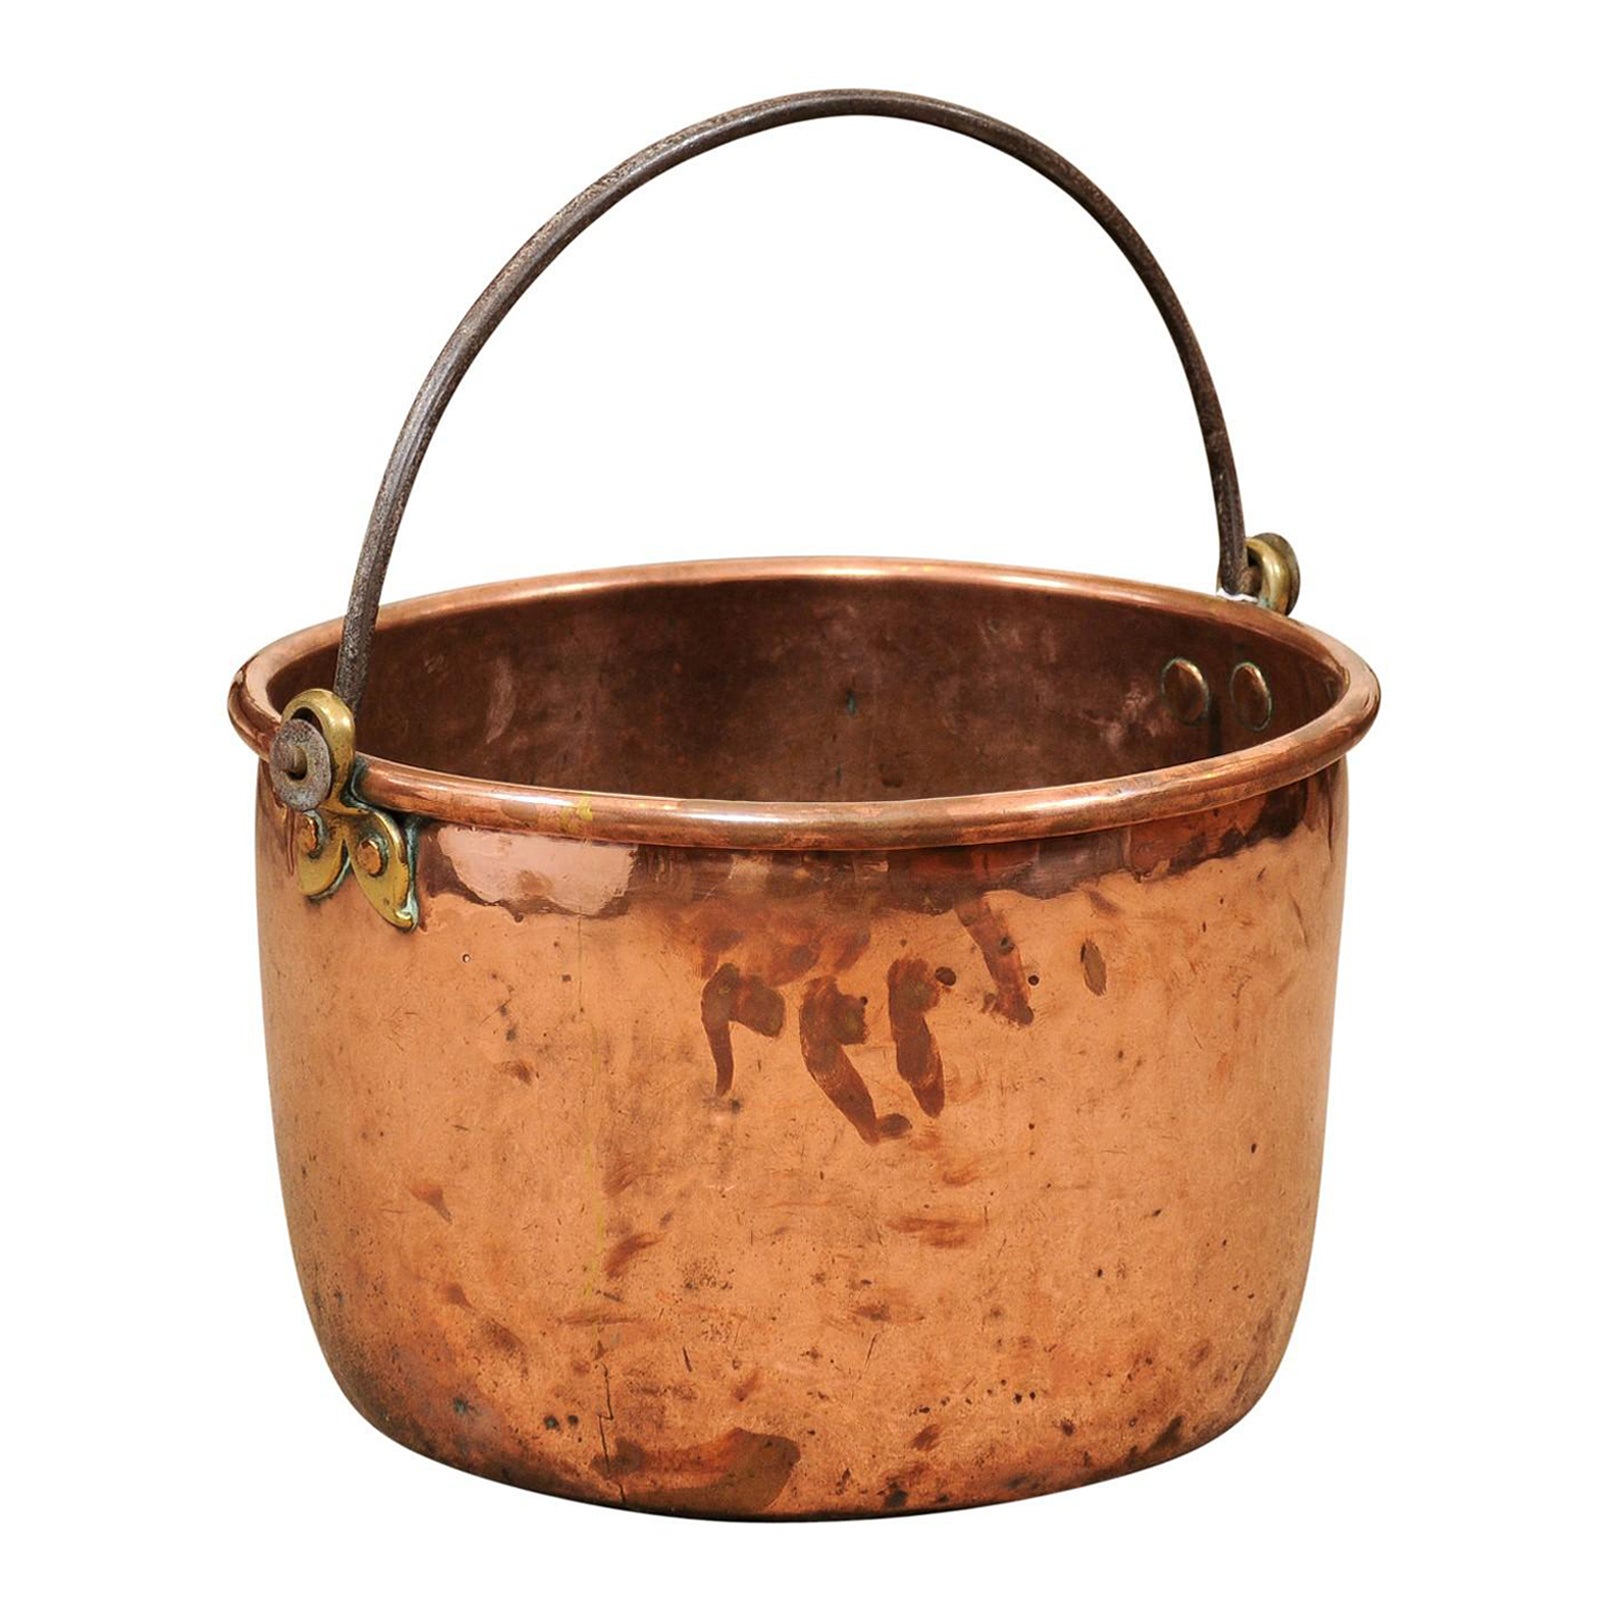  Large 18th Century Copper Pot with Wrought Iron Handle